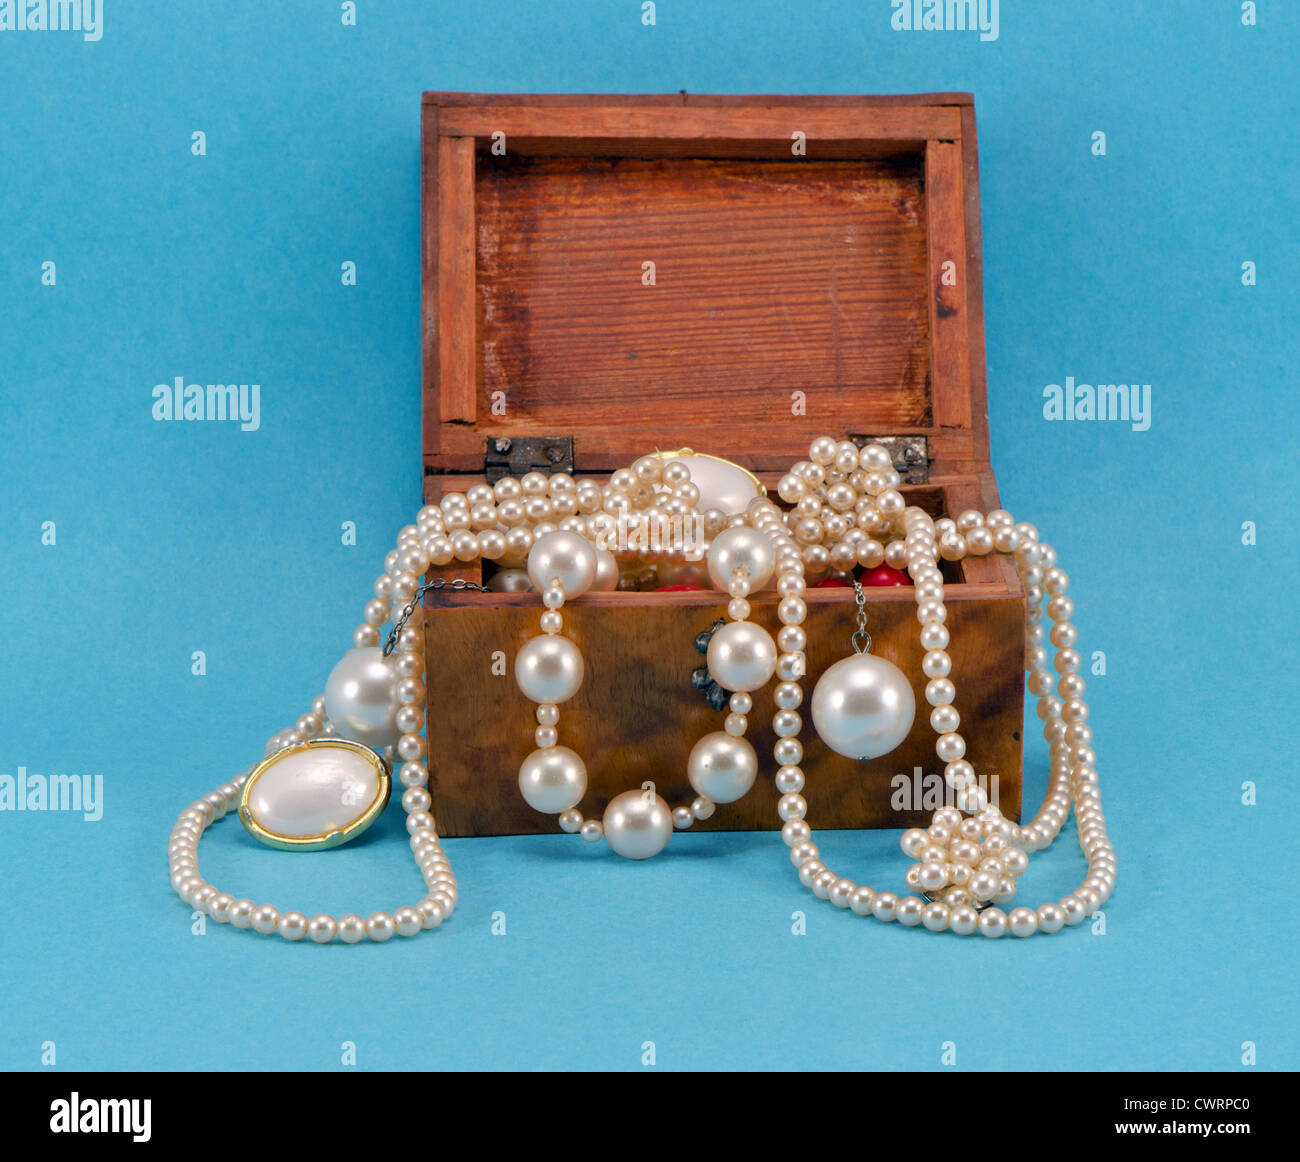 Pearl jewelry beads necklace earring in retro wooden box on blue background Stock Photo